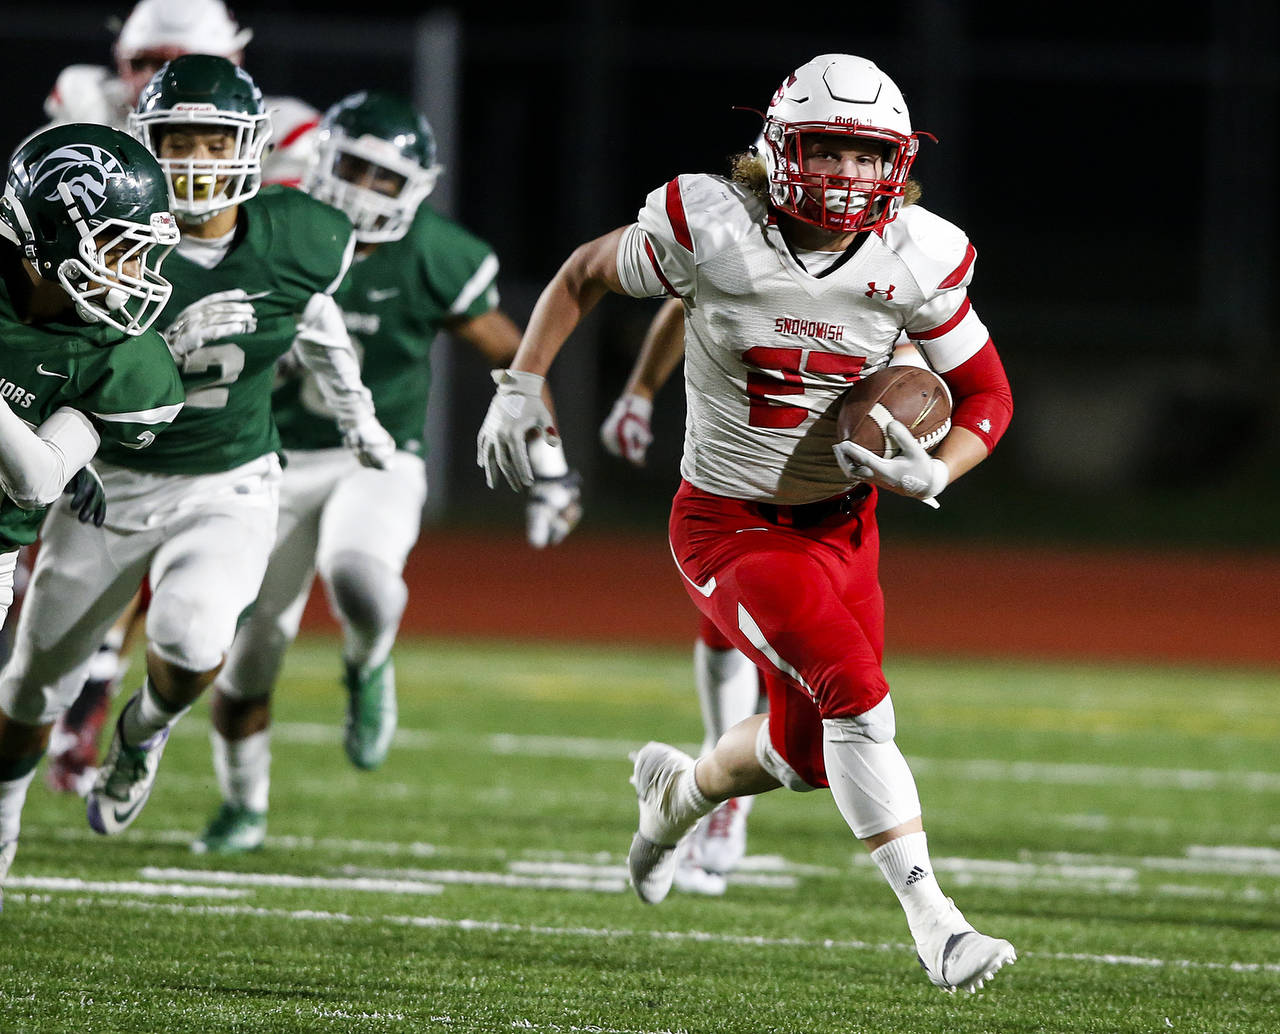 Snohomish’s Keegan Stich (right) breaks free and runs for a touchdown during a game against Edmonds-Woodway on Oct. 27, 2017, at Edmonds Stadium. (Ian Terry / The Herald)